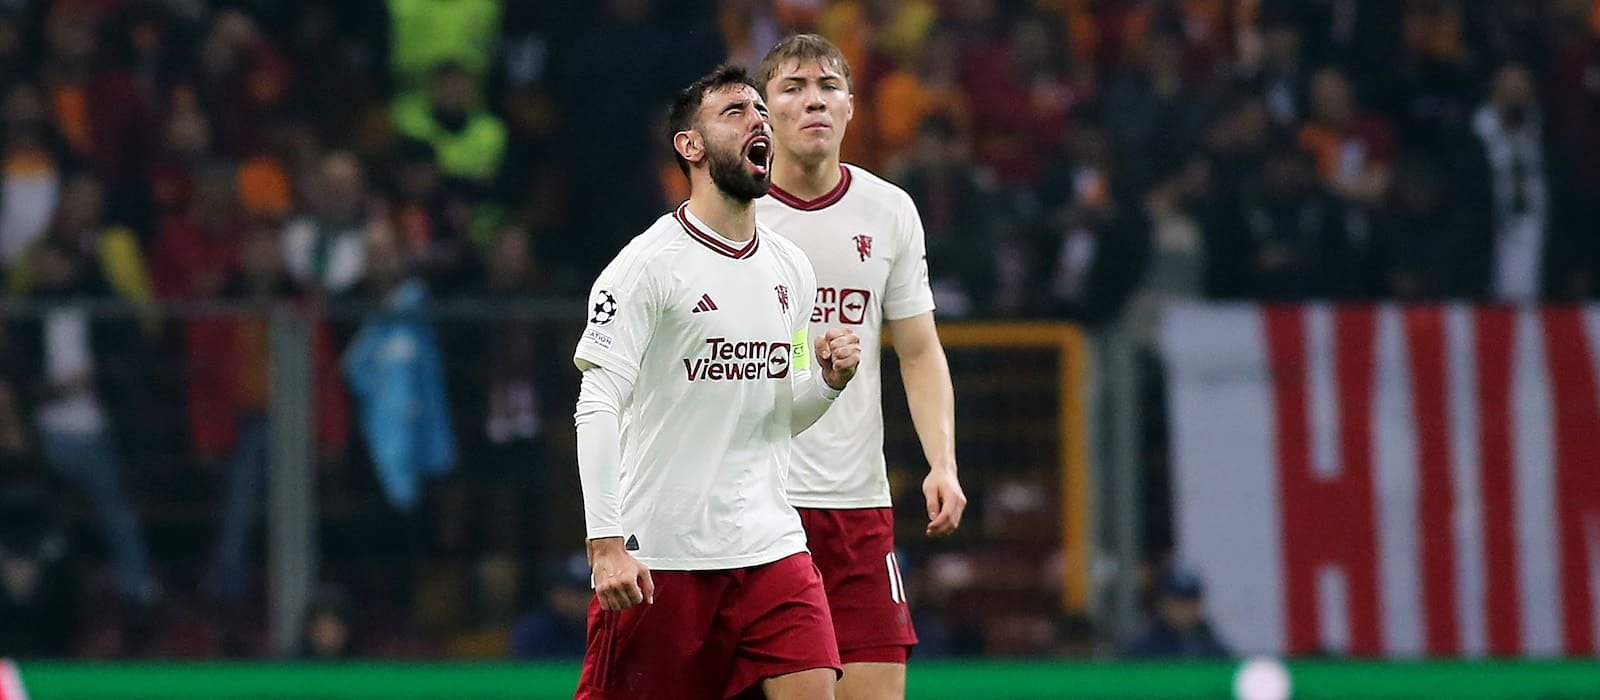 “He knows he needs to do better”: Bruno Fernandes opens up on Andre Onana’s calamitous display vs. Galatasaray – Man United News And Transfer News